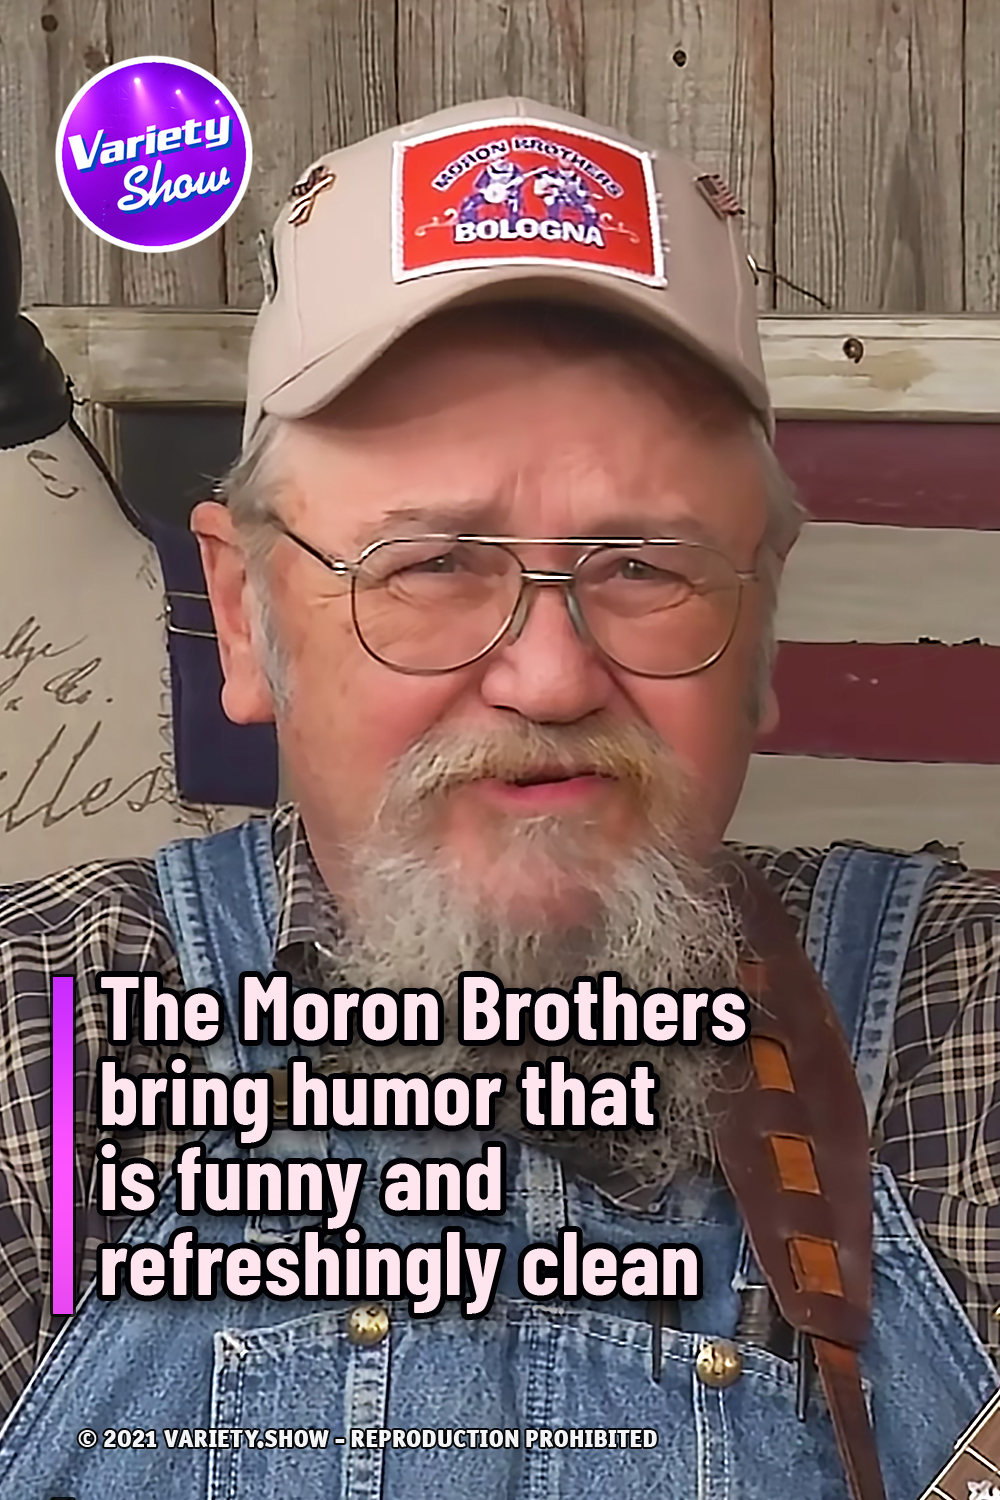 The Moron Brothers bring humor that is funny and refreshingly clean